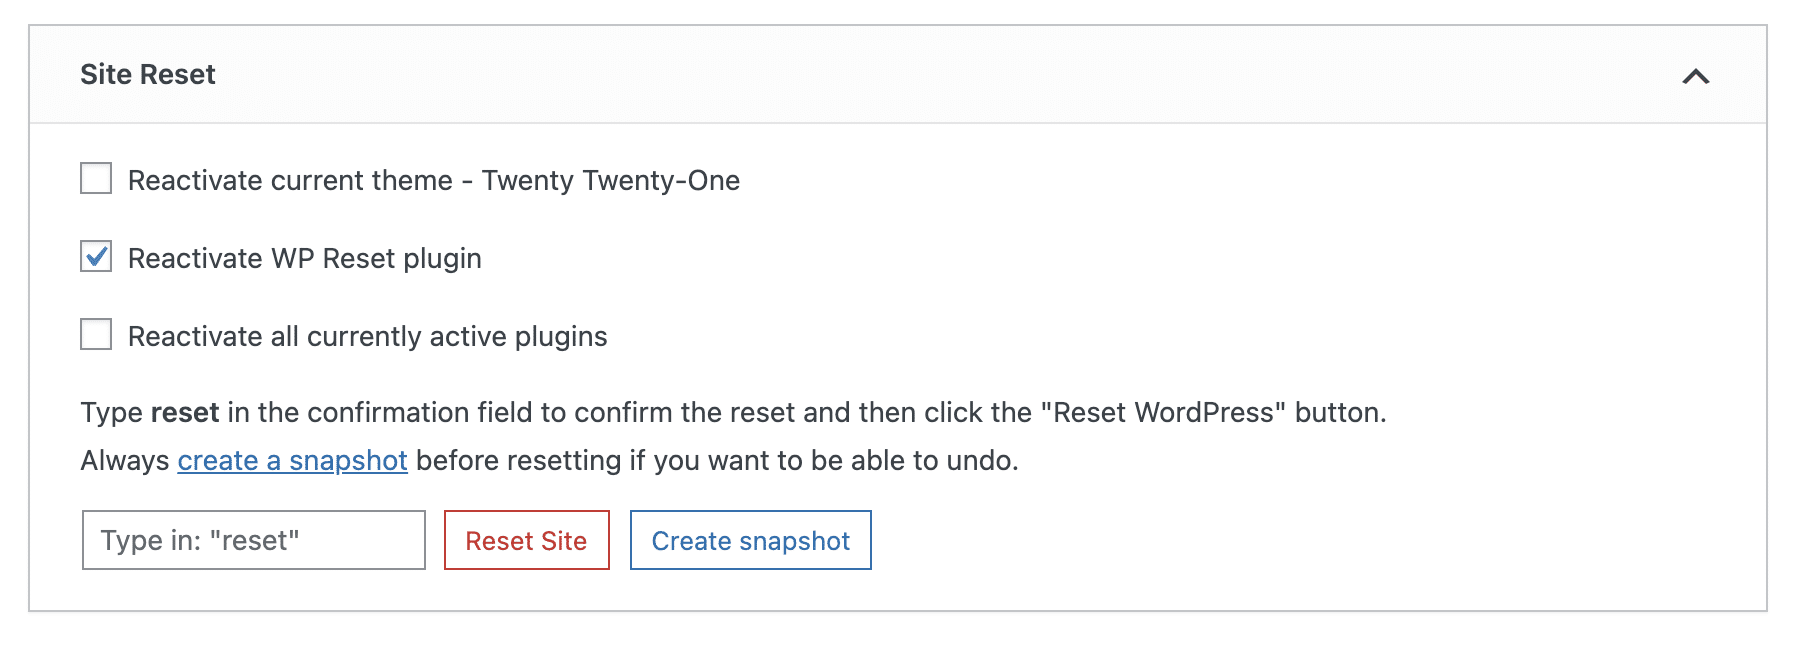 WP Reset allows you to reset your WordPress site in one click.